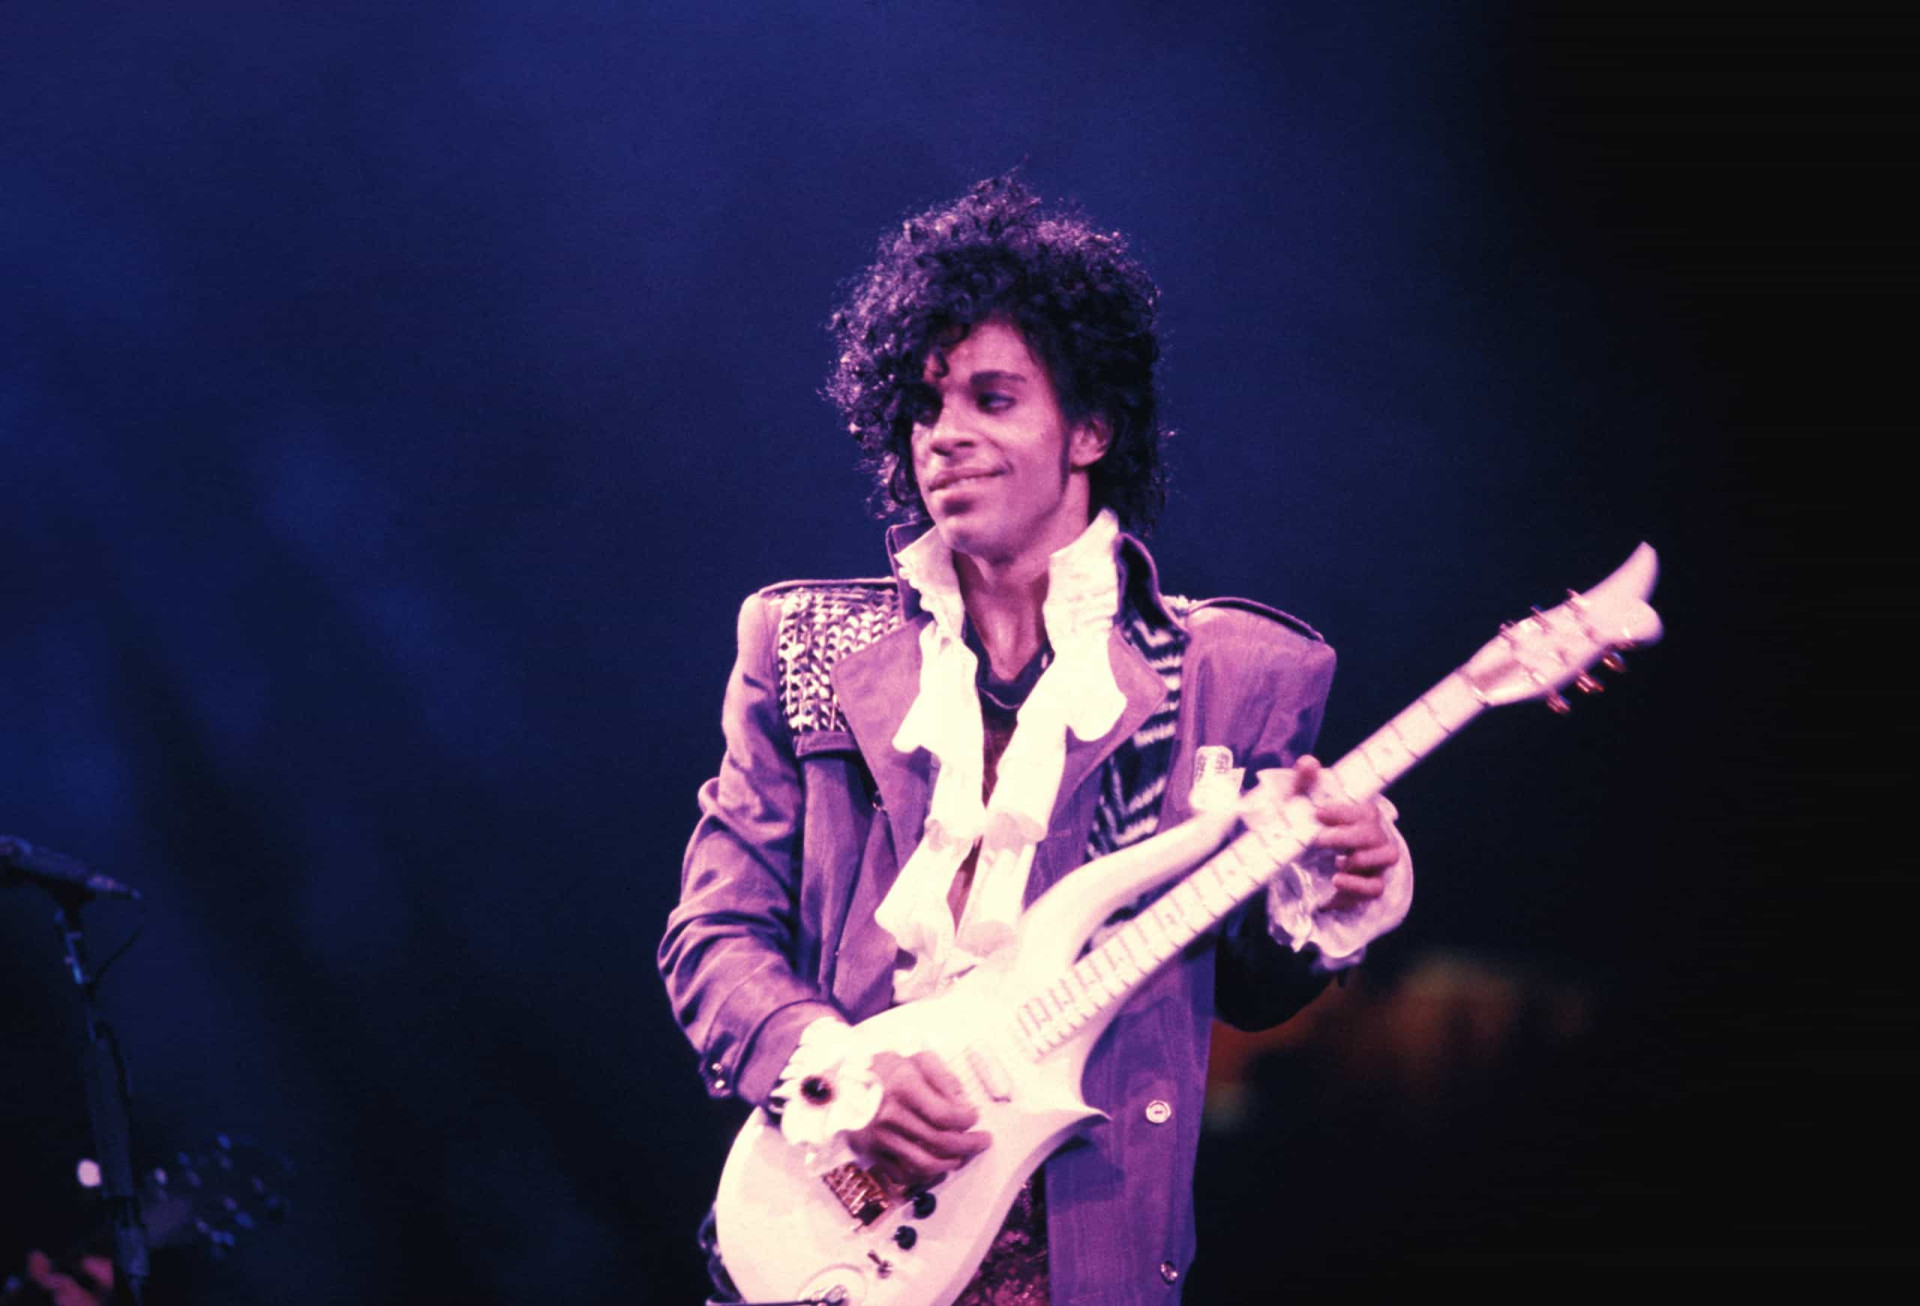 <p>A worldwide hit for Prince in 1984, 'When Doves Cry' appears on the singer's seminal album 'Purple Rain.' The track also features in the <a href="https://www.starsinsider.com/movies/382533/the-best-ever-stage-to-screen-musicals" rel="noopener">movie</a> of the same name. It's said that when a dove cries it symbolizes new beginnings, and serves as a prophecy of things to come.</p><p><a href="https://www.msn.com/en-my/community/channel/vid-7xx8mnucu55yw63we9va2gwr7uihbxwc68fxqp25x6tg4ftibpra?cvid=94631541bc0f4f89bfd59158d696ad7e">Follow us and access great exclusive content every day</a></p>